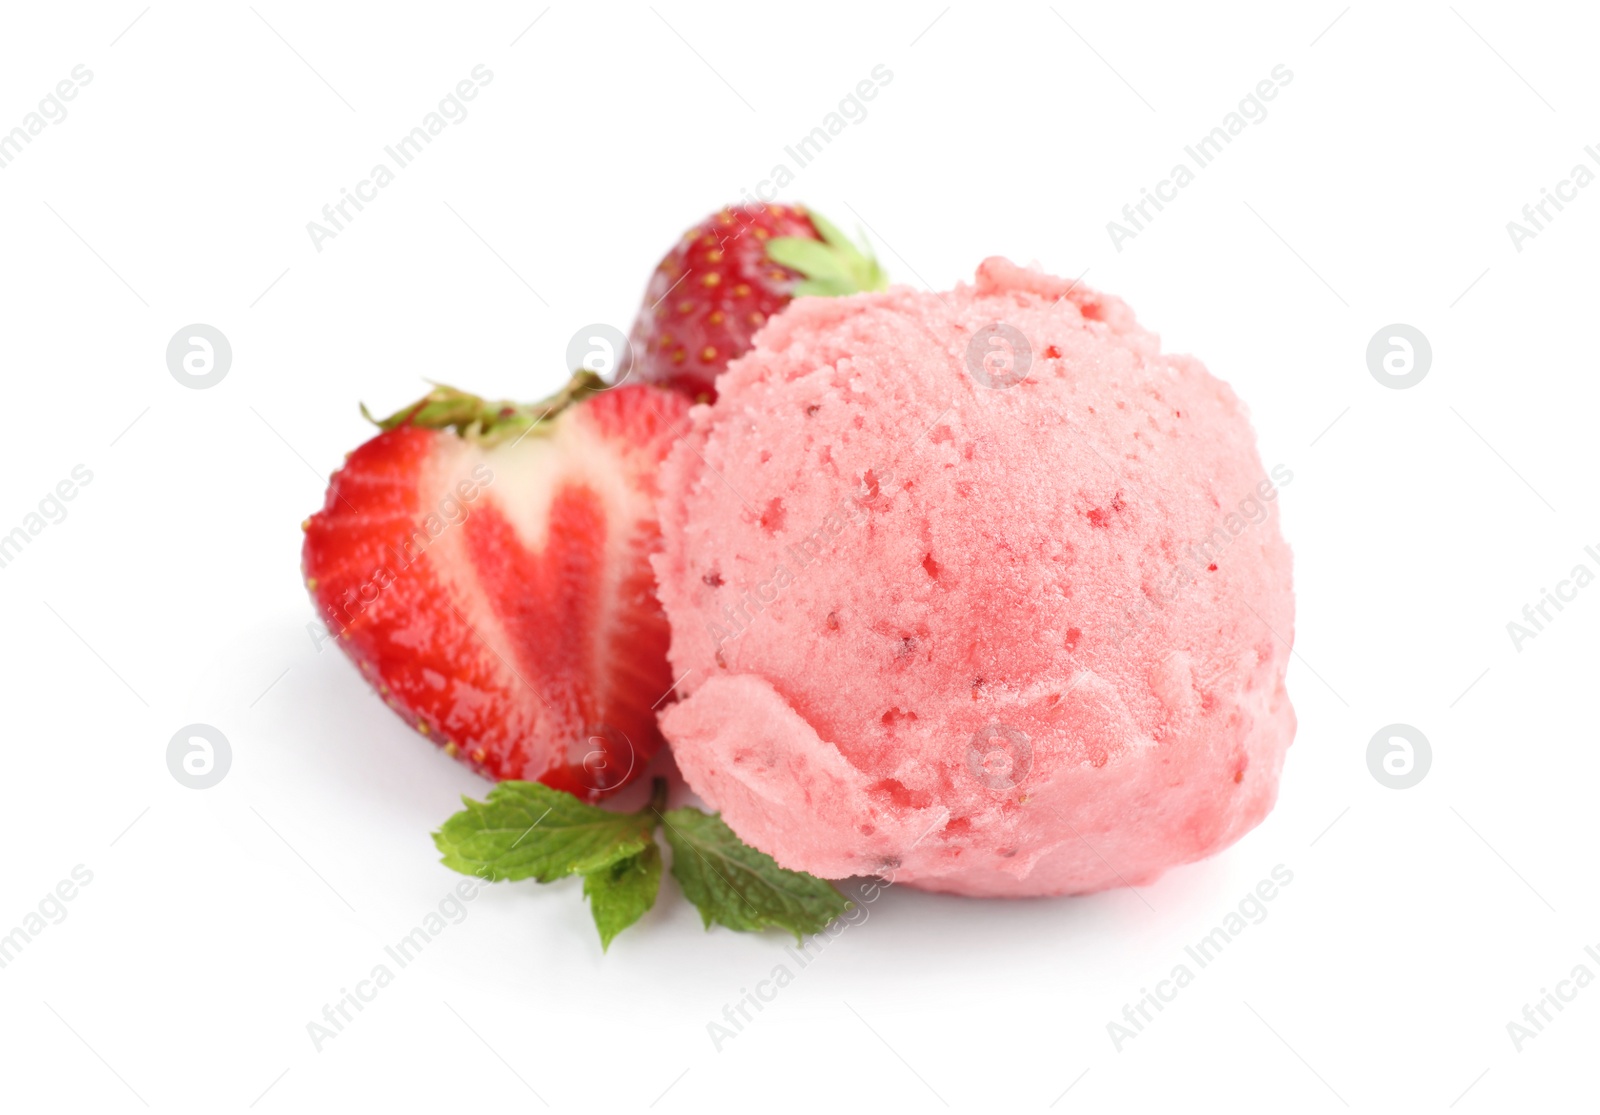 Photo of Scoop of delicious strawberry ice cream with mint and fresh berries on white background